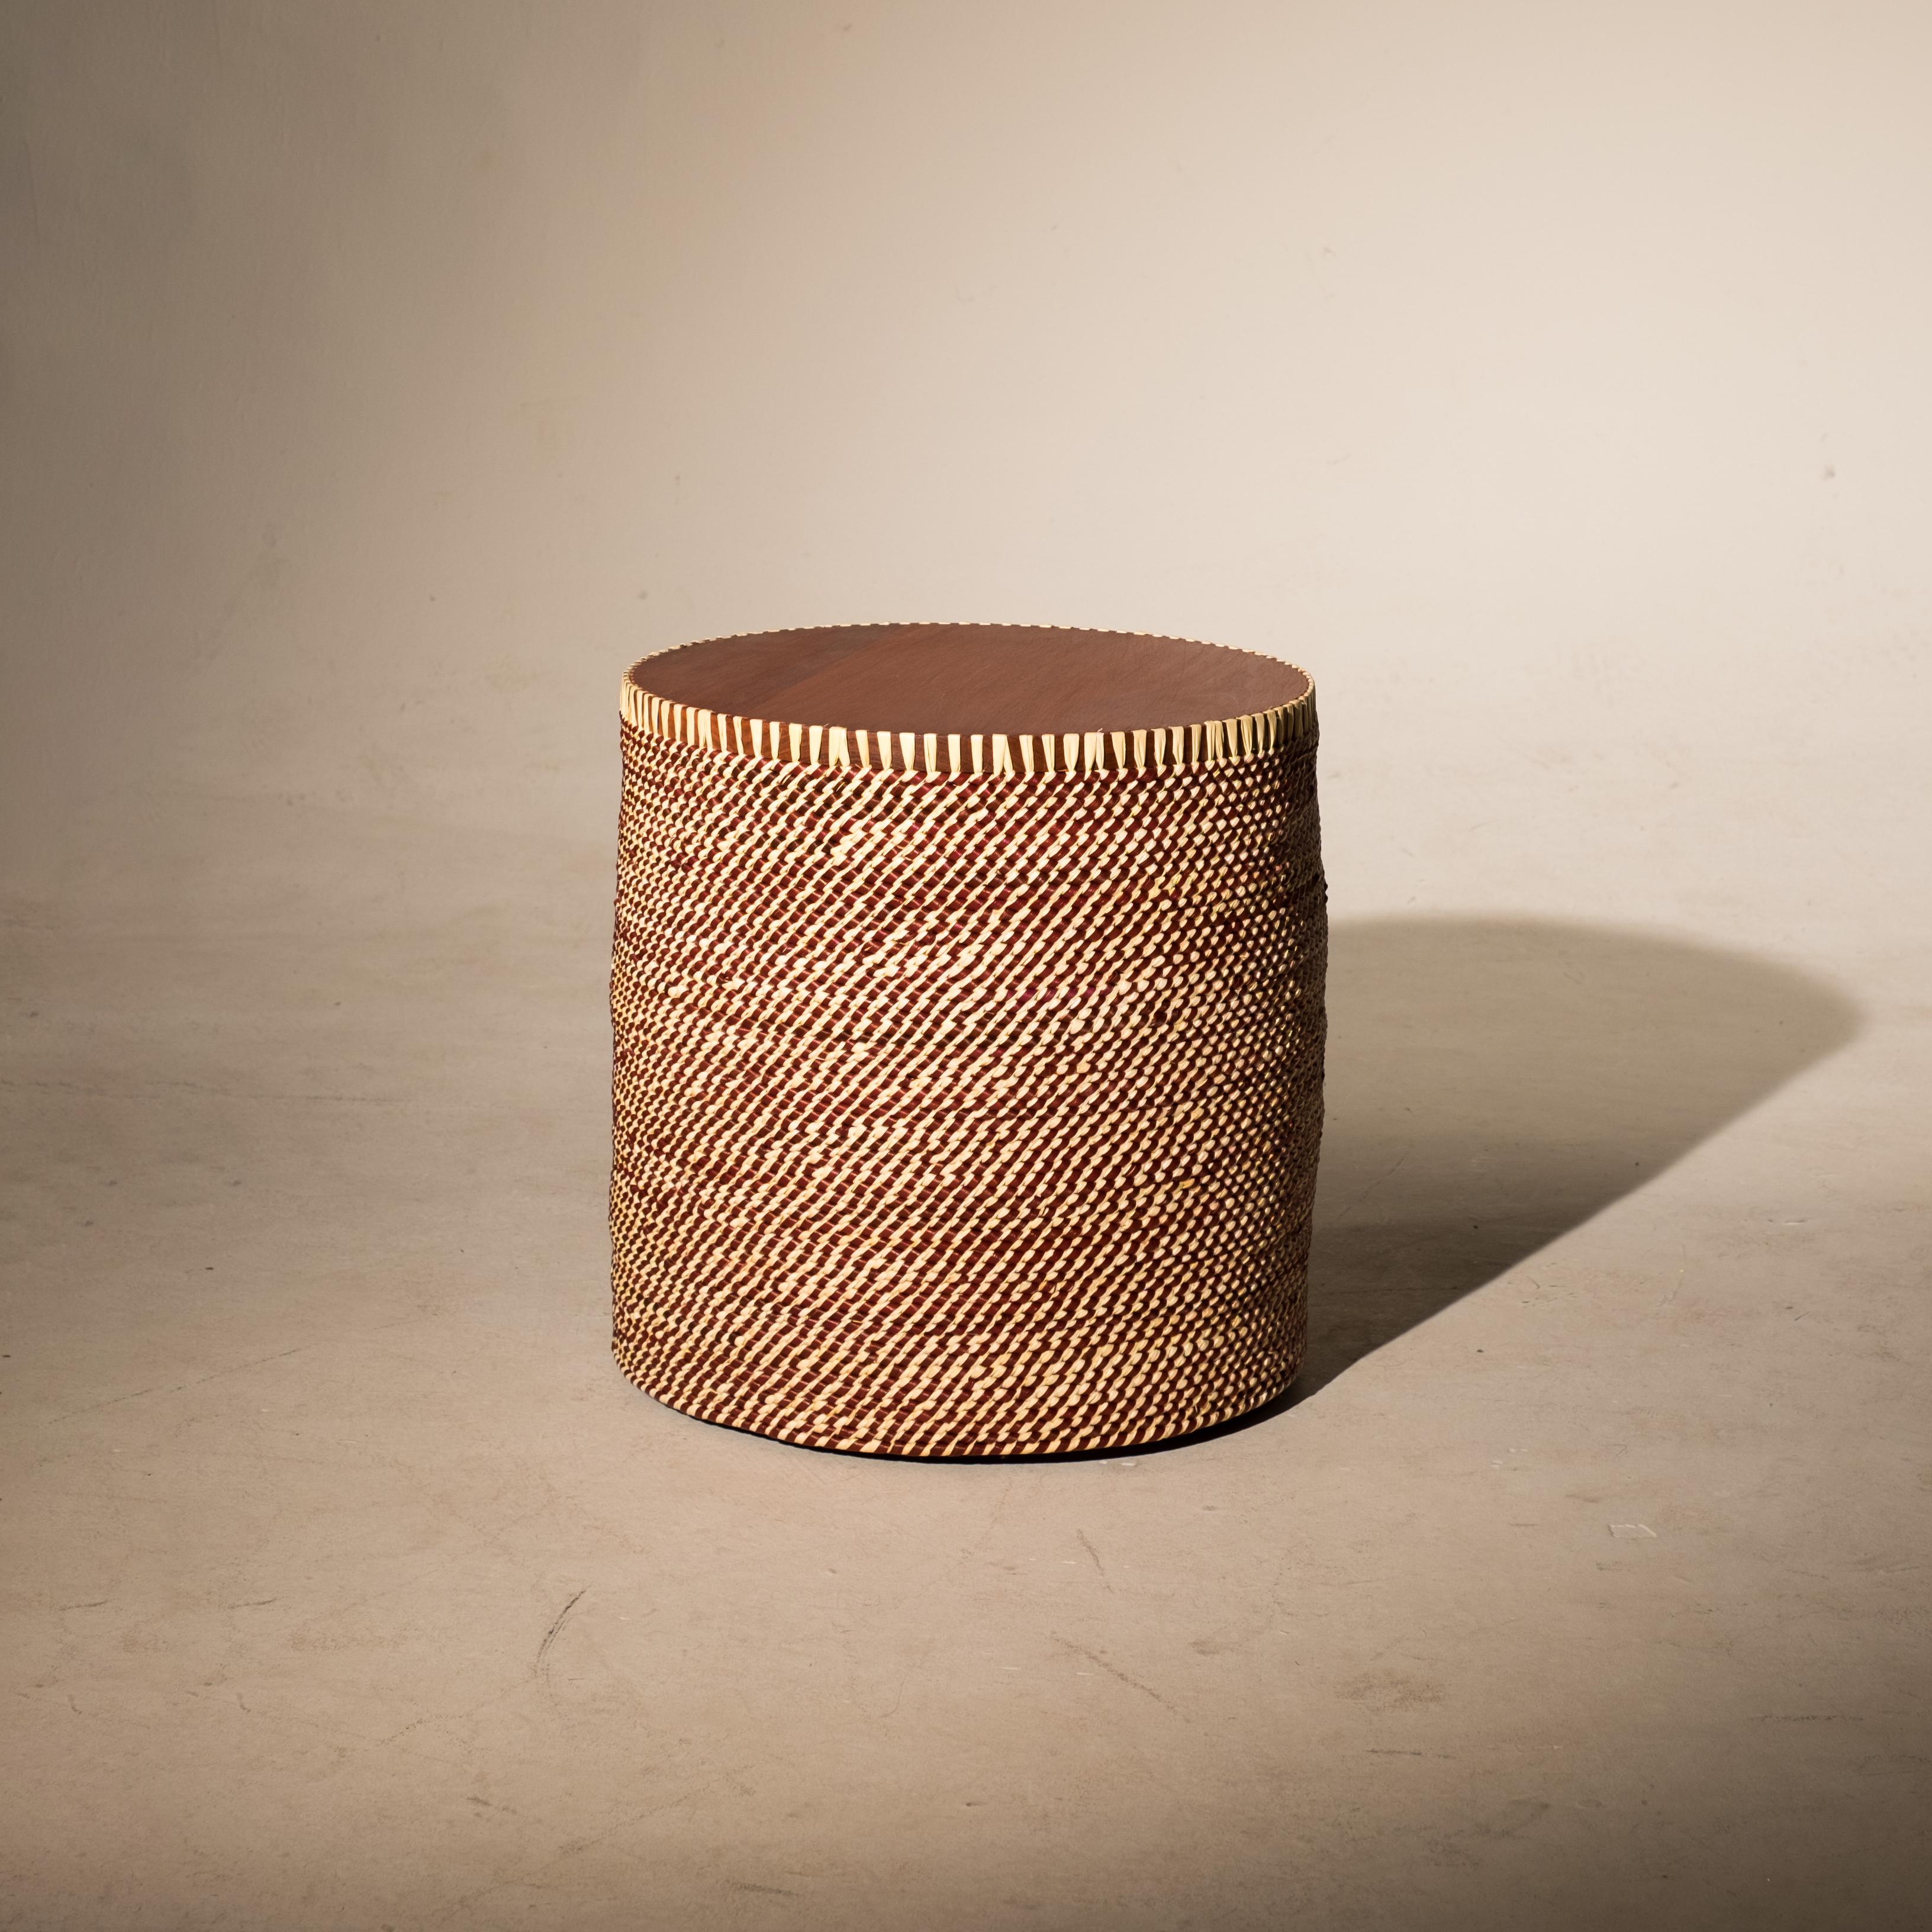 Palafitas side table is made of Imbuia or cabreuva wood and bring the Tucumã straw, a typical palm of the Amazon rainforest, stained with roots, leaves and fruits, and braided by the artisans of the riverside Community of Urucureá, in Pará.

Like